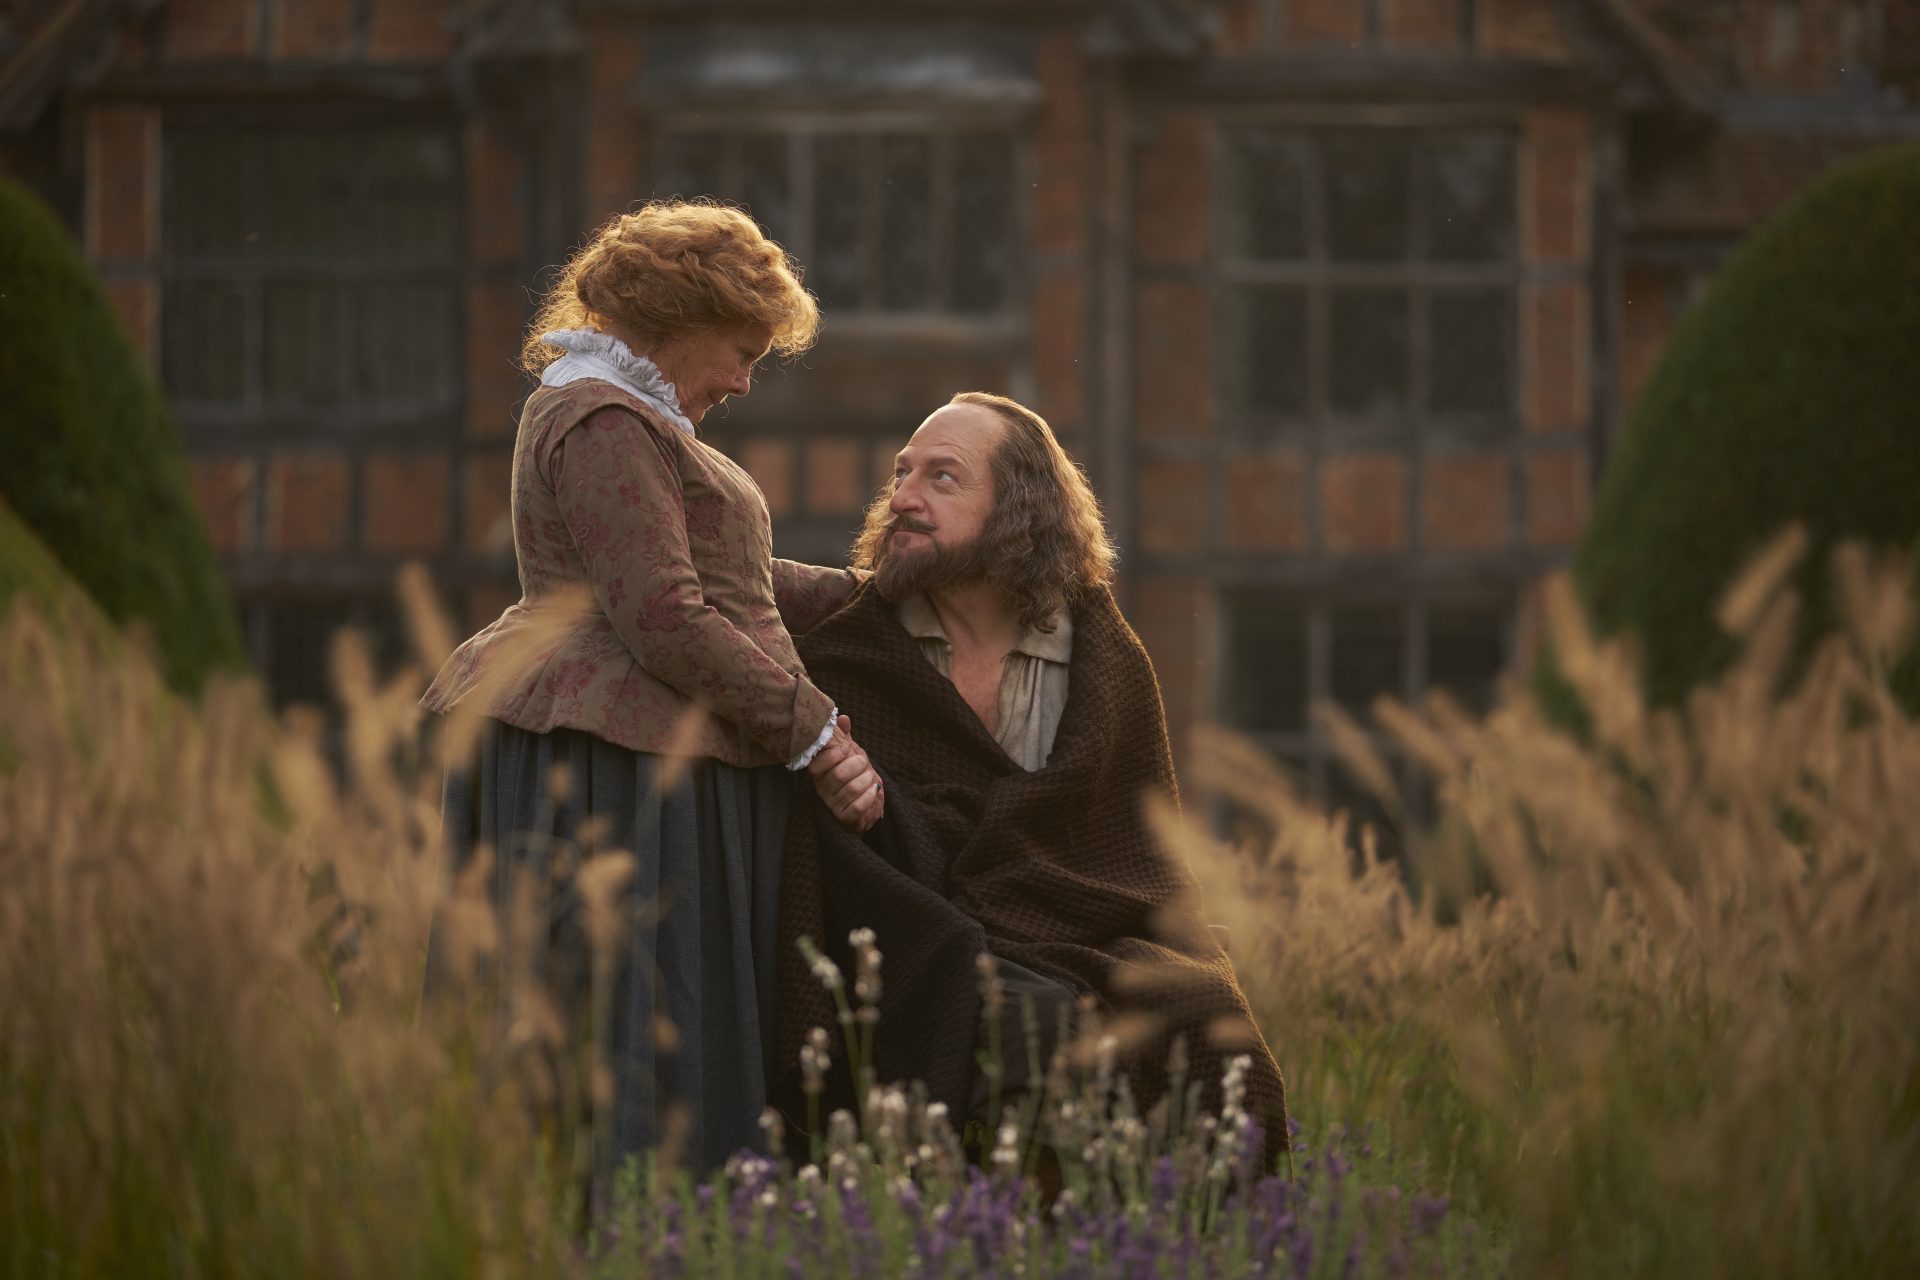 Left to Right: Judi Dench as Anne Hathaway, Kenneth Branagh as William Shakespeare Photo by Robert Youngson, Courtesy of Sony Pictures Classics